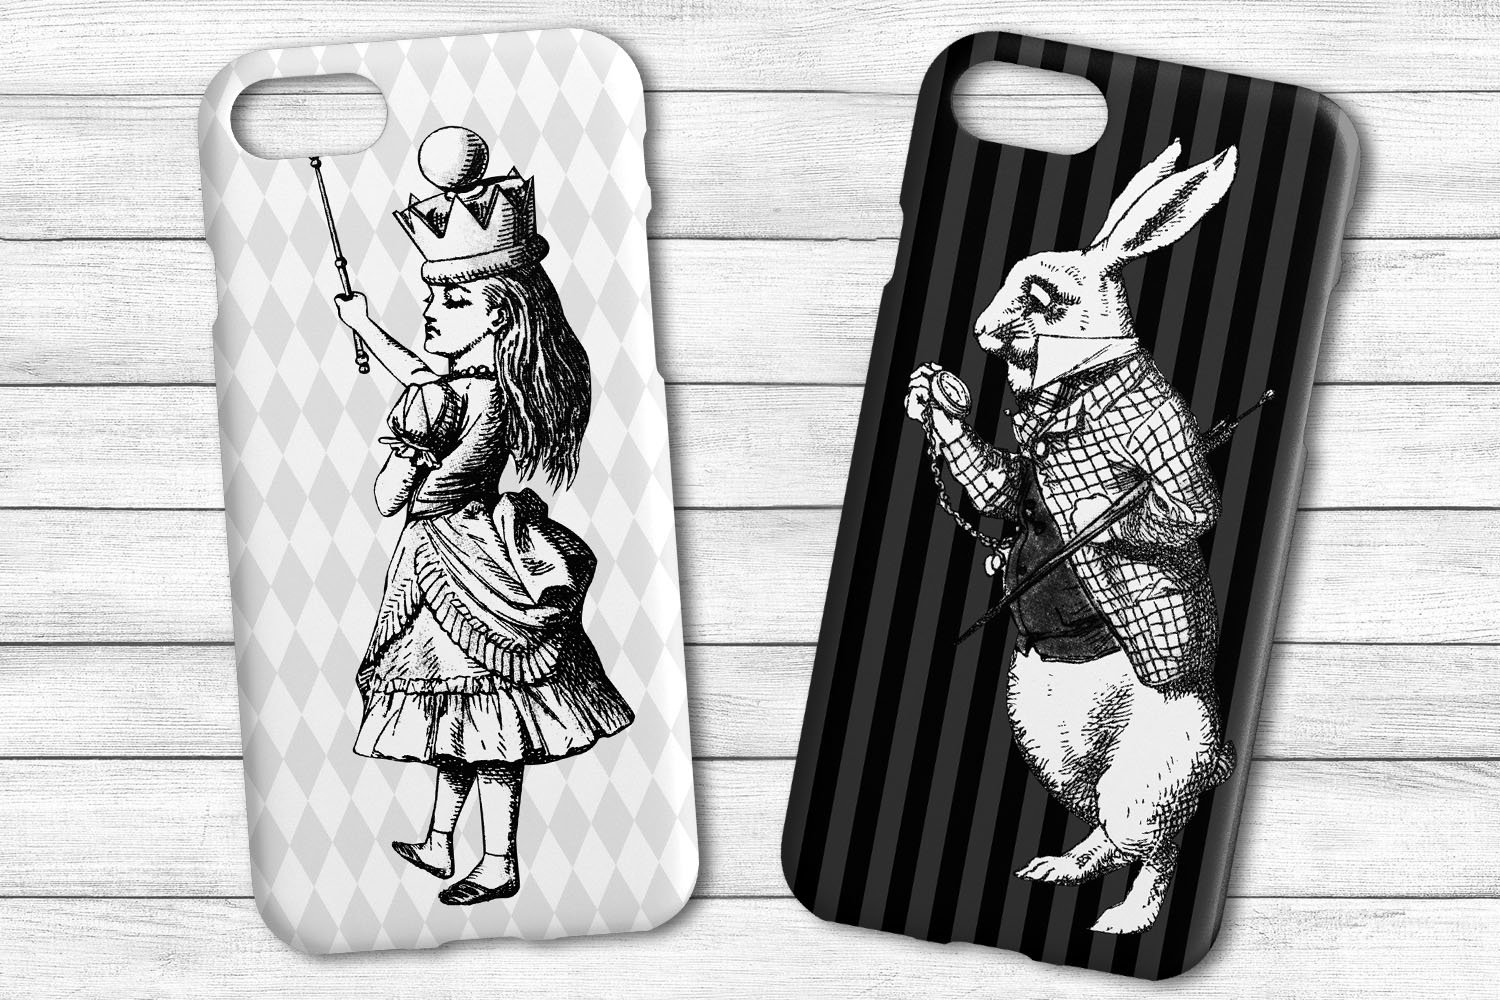 Images of fairy tale characters on the phone cover.